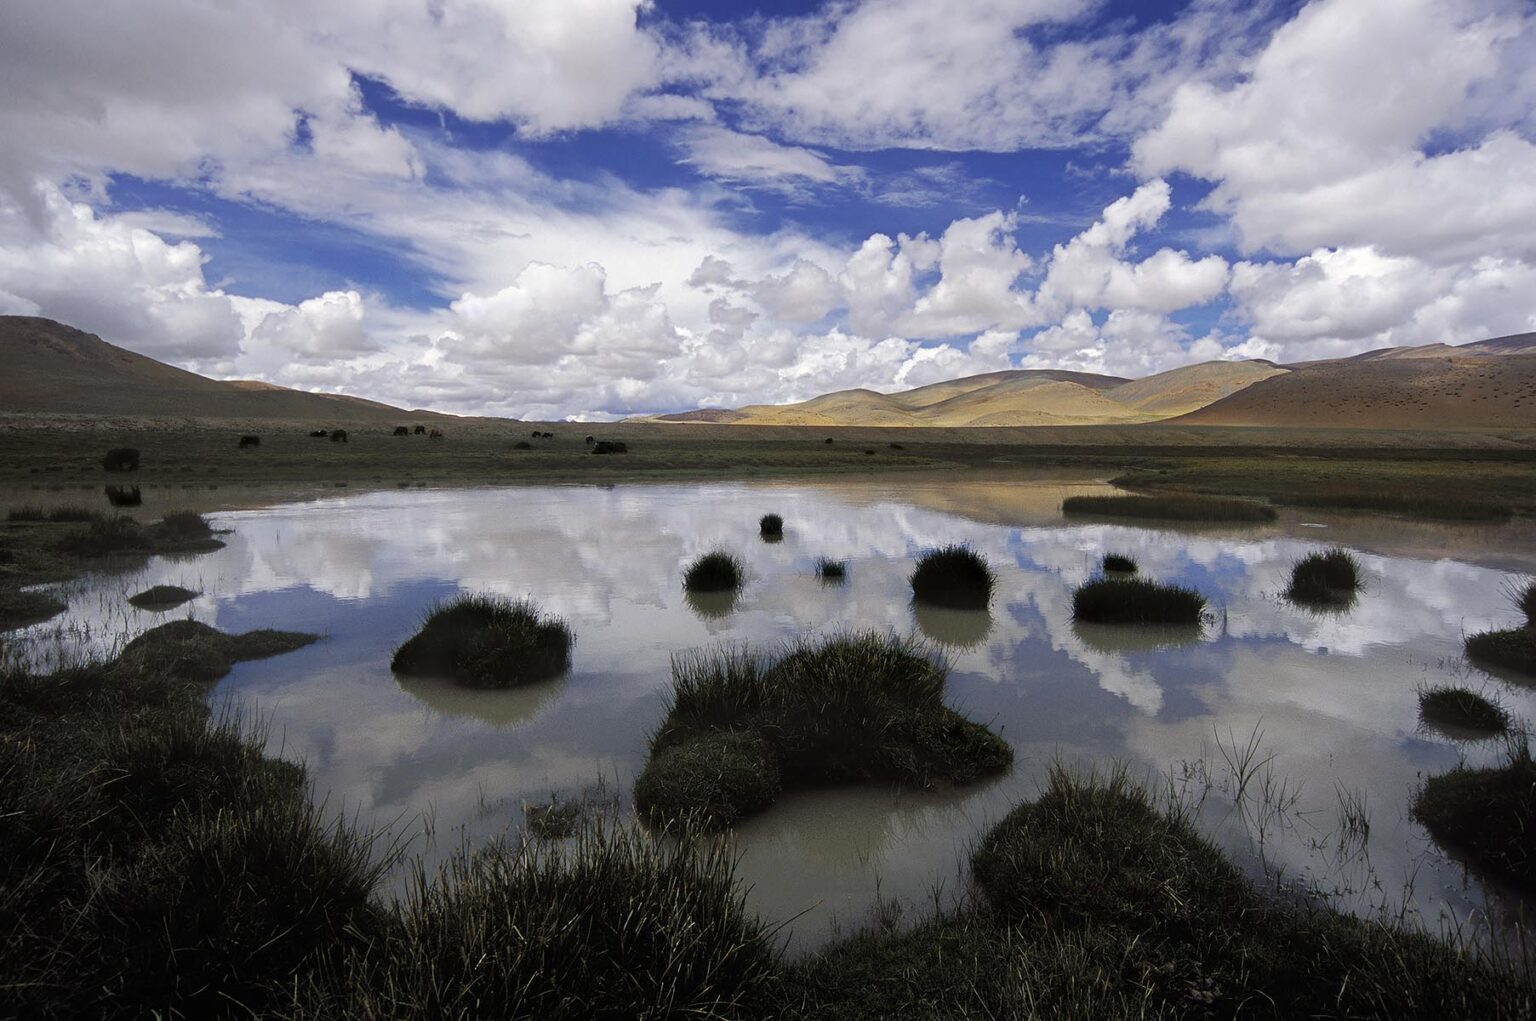 CLOUDS reflect in stream as YAKS graze on the TIBETAN PLATEAU - Southern route to MOUNT KAILASH, TIBET